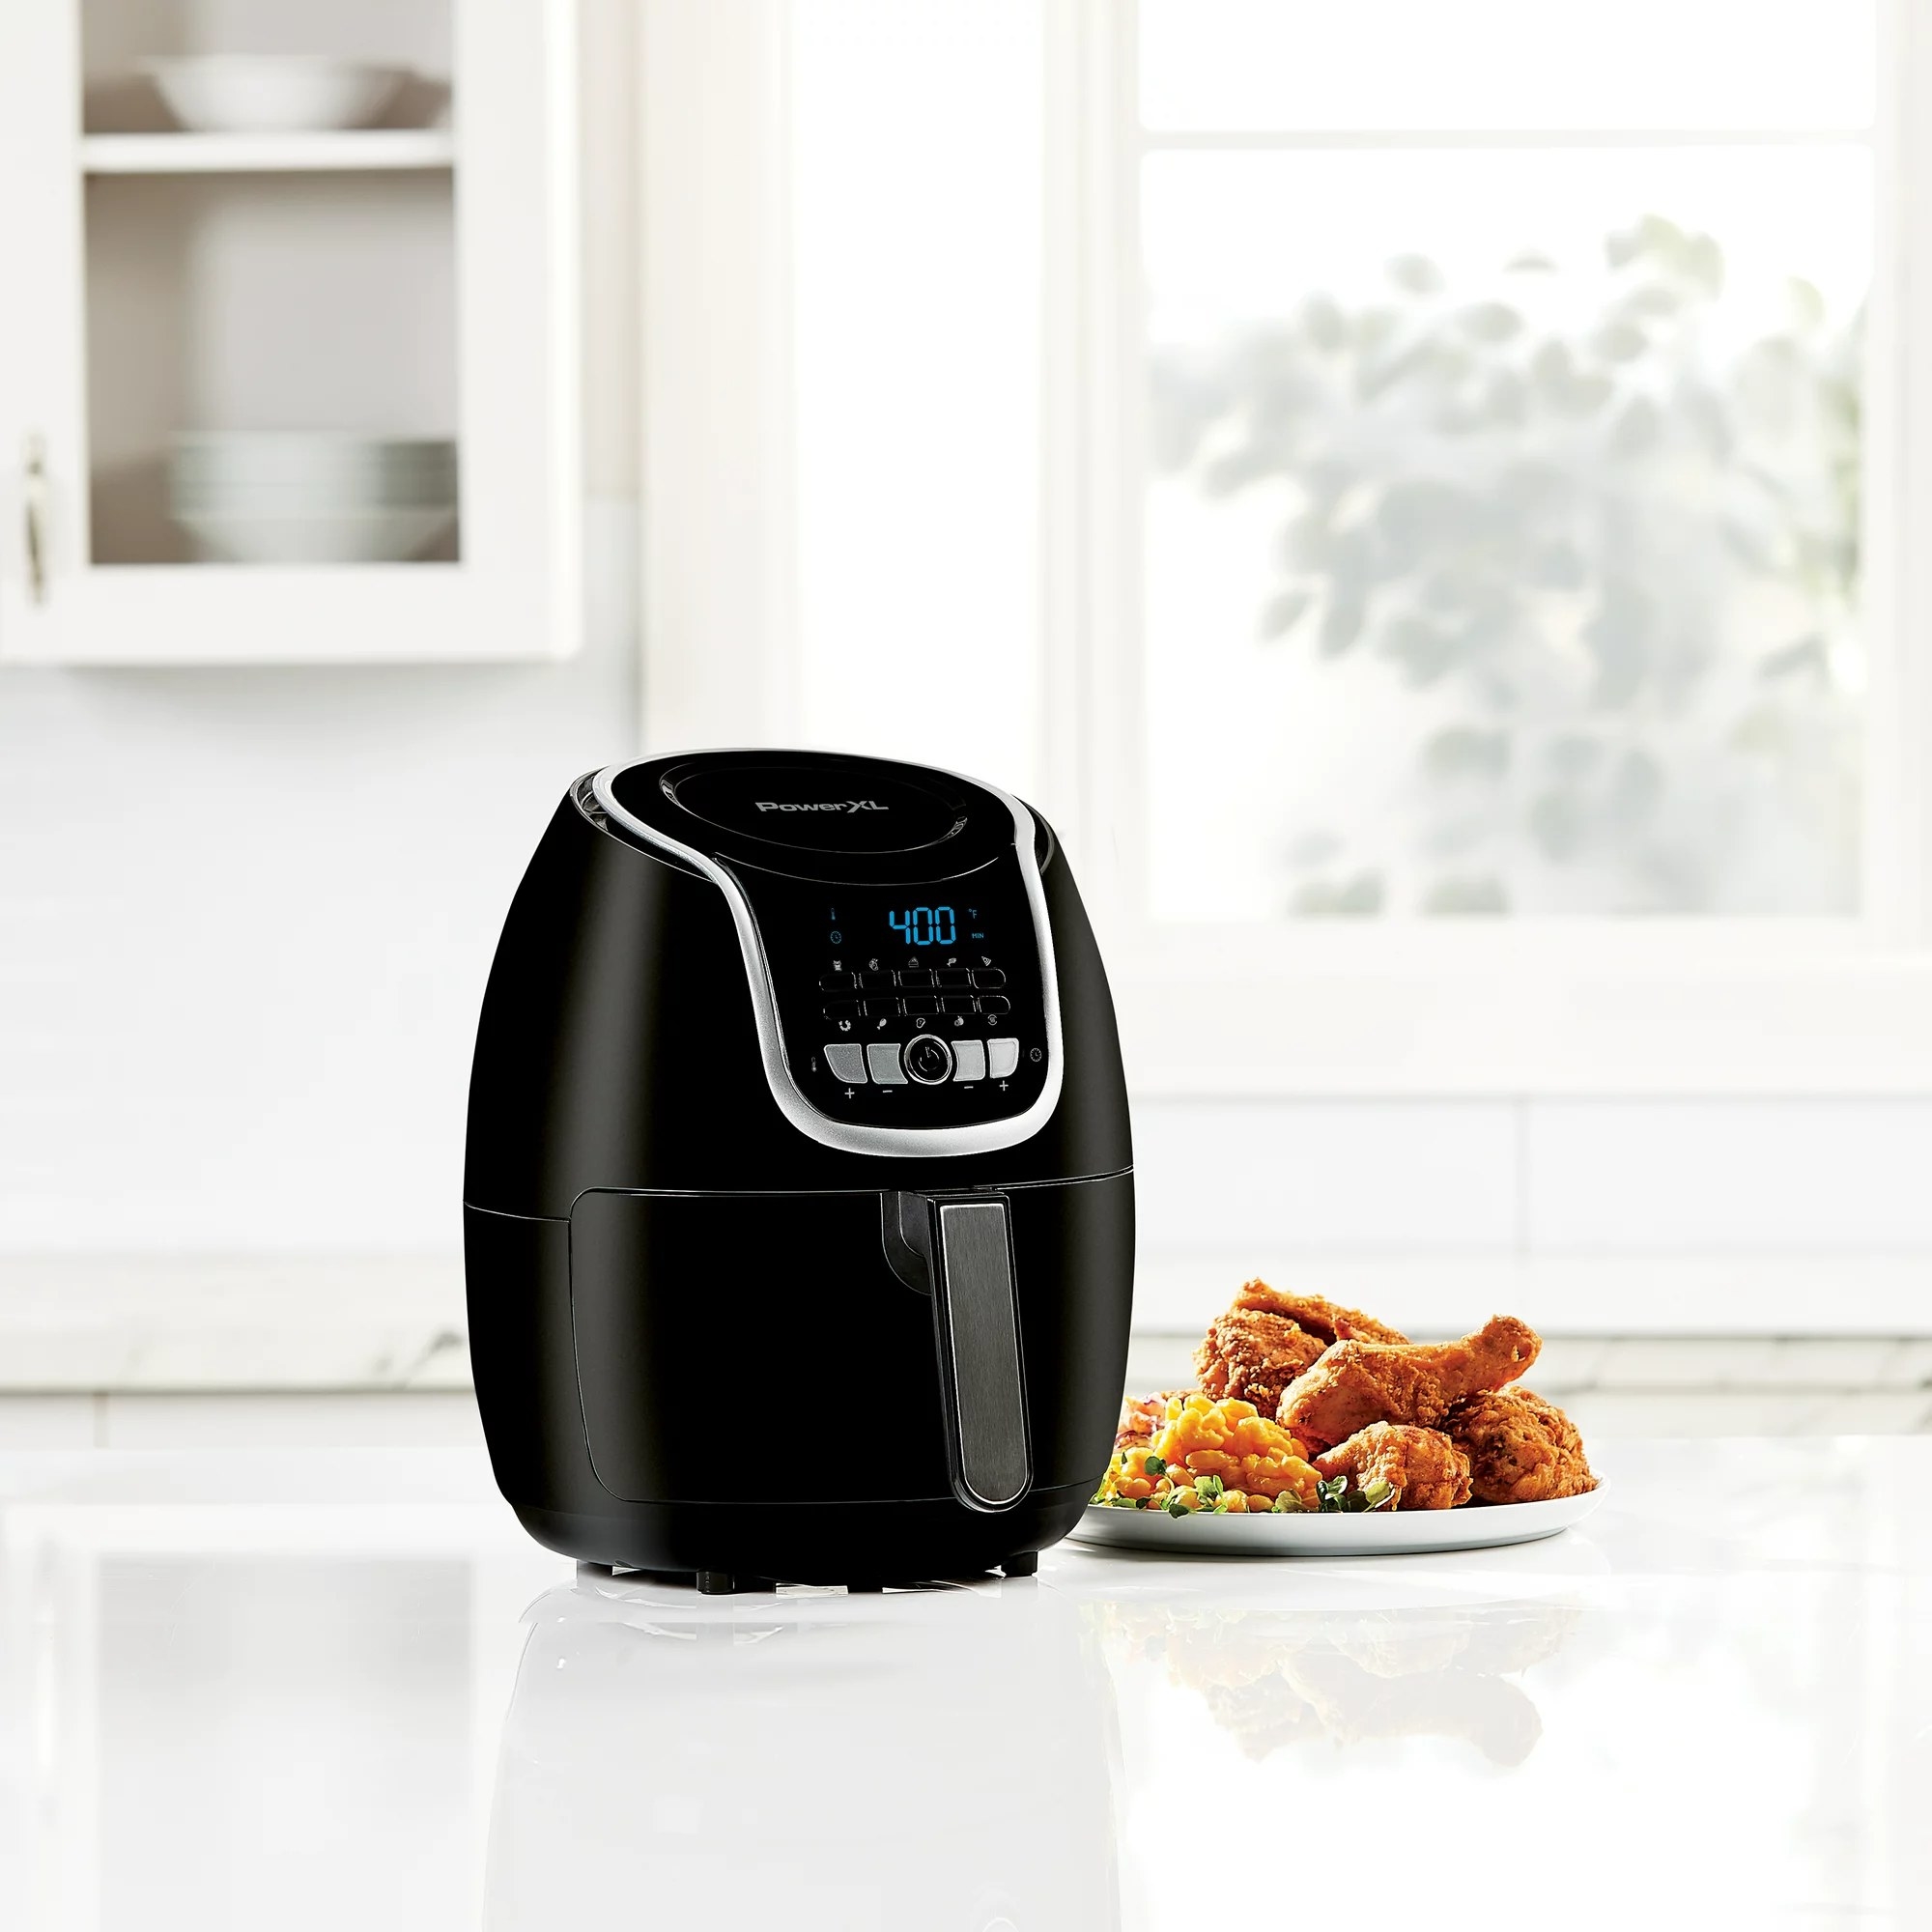 the air fryer with a plate of food next to it